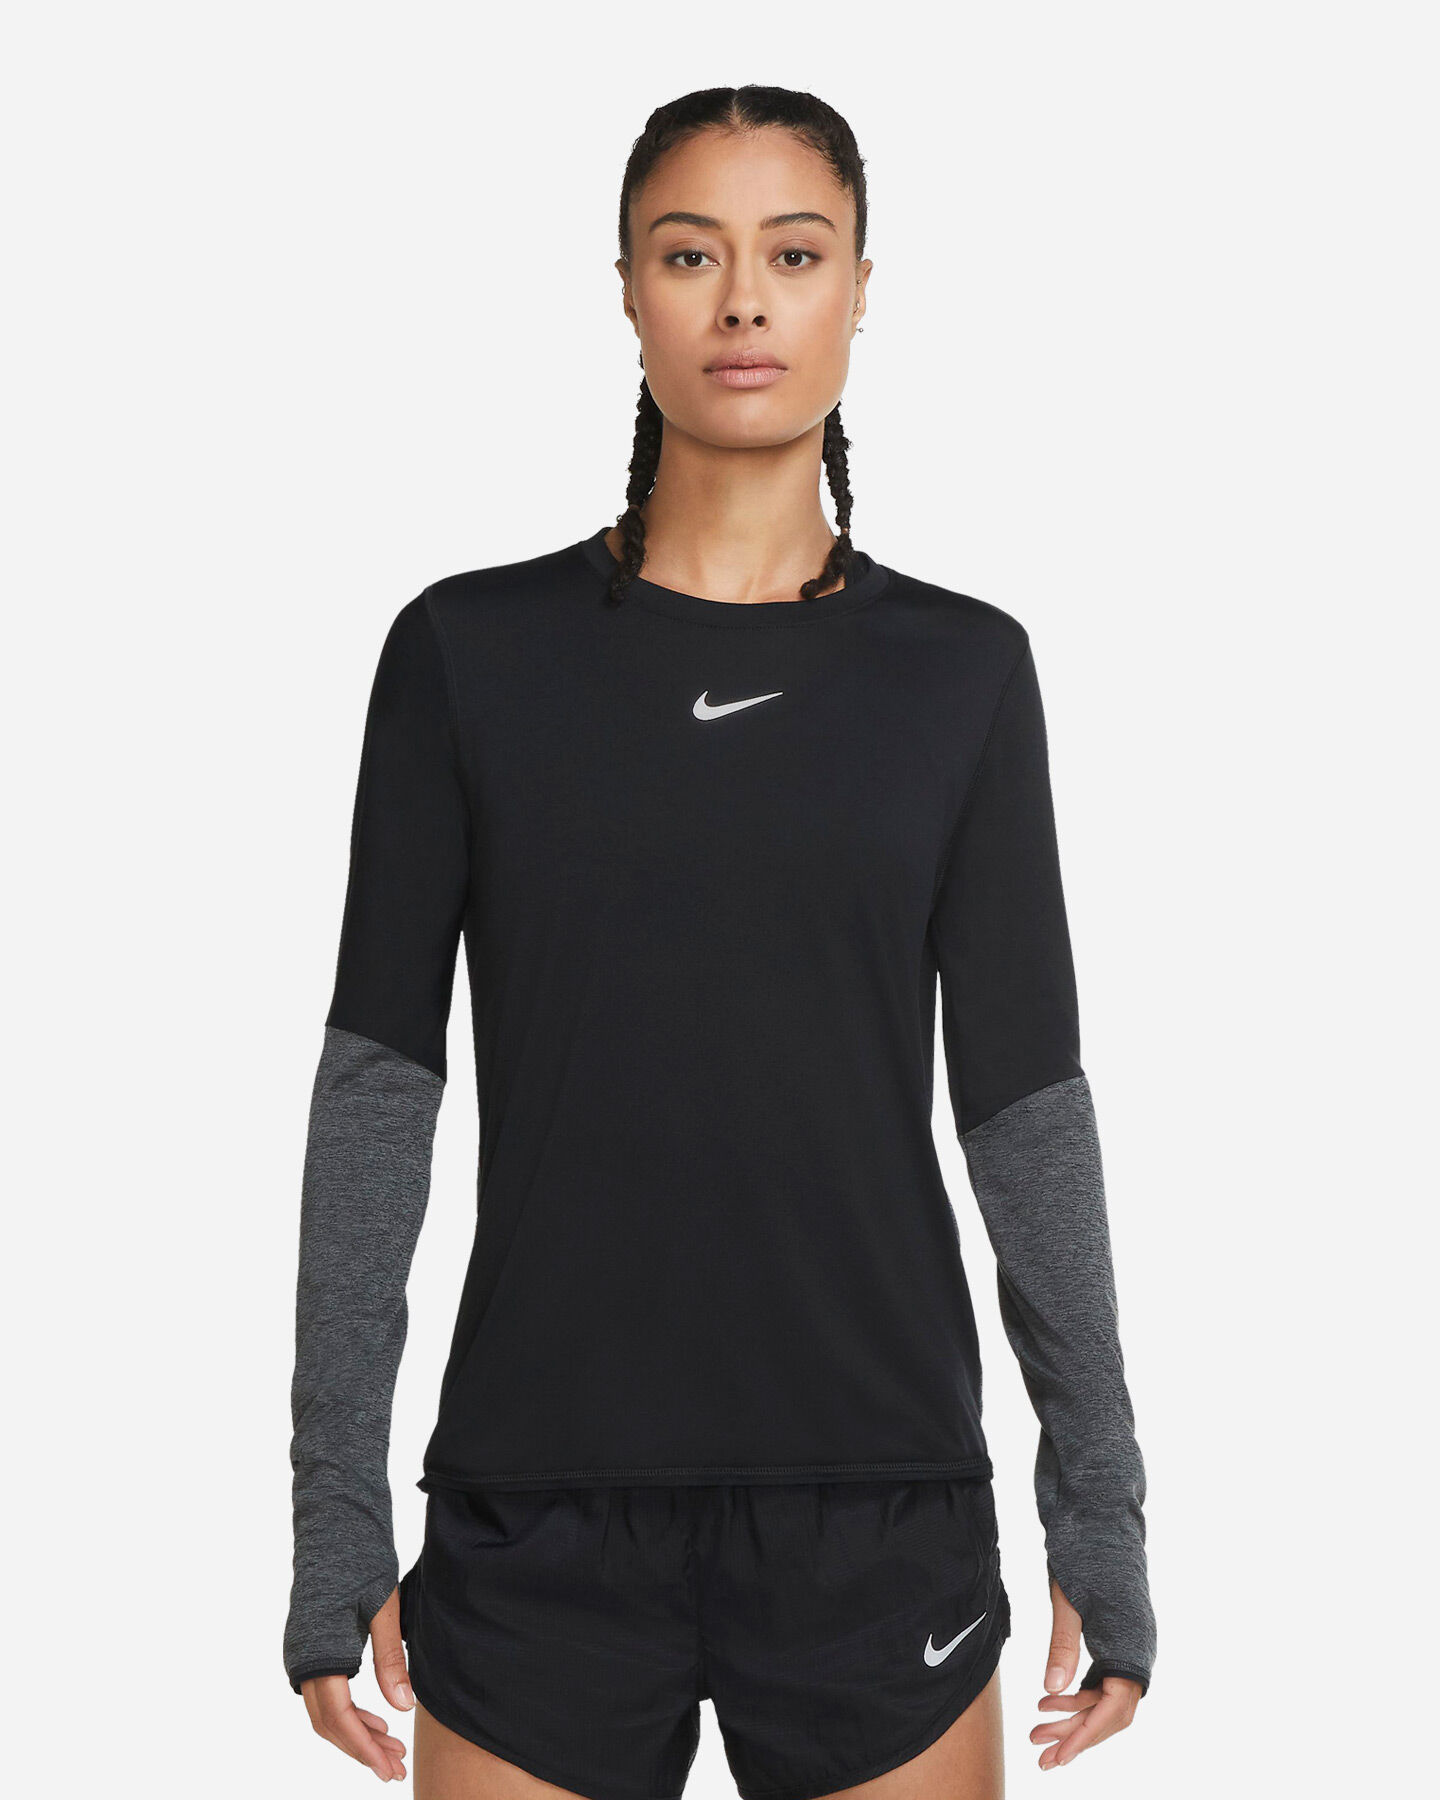 completino nike donna